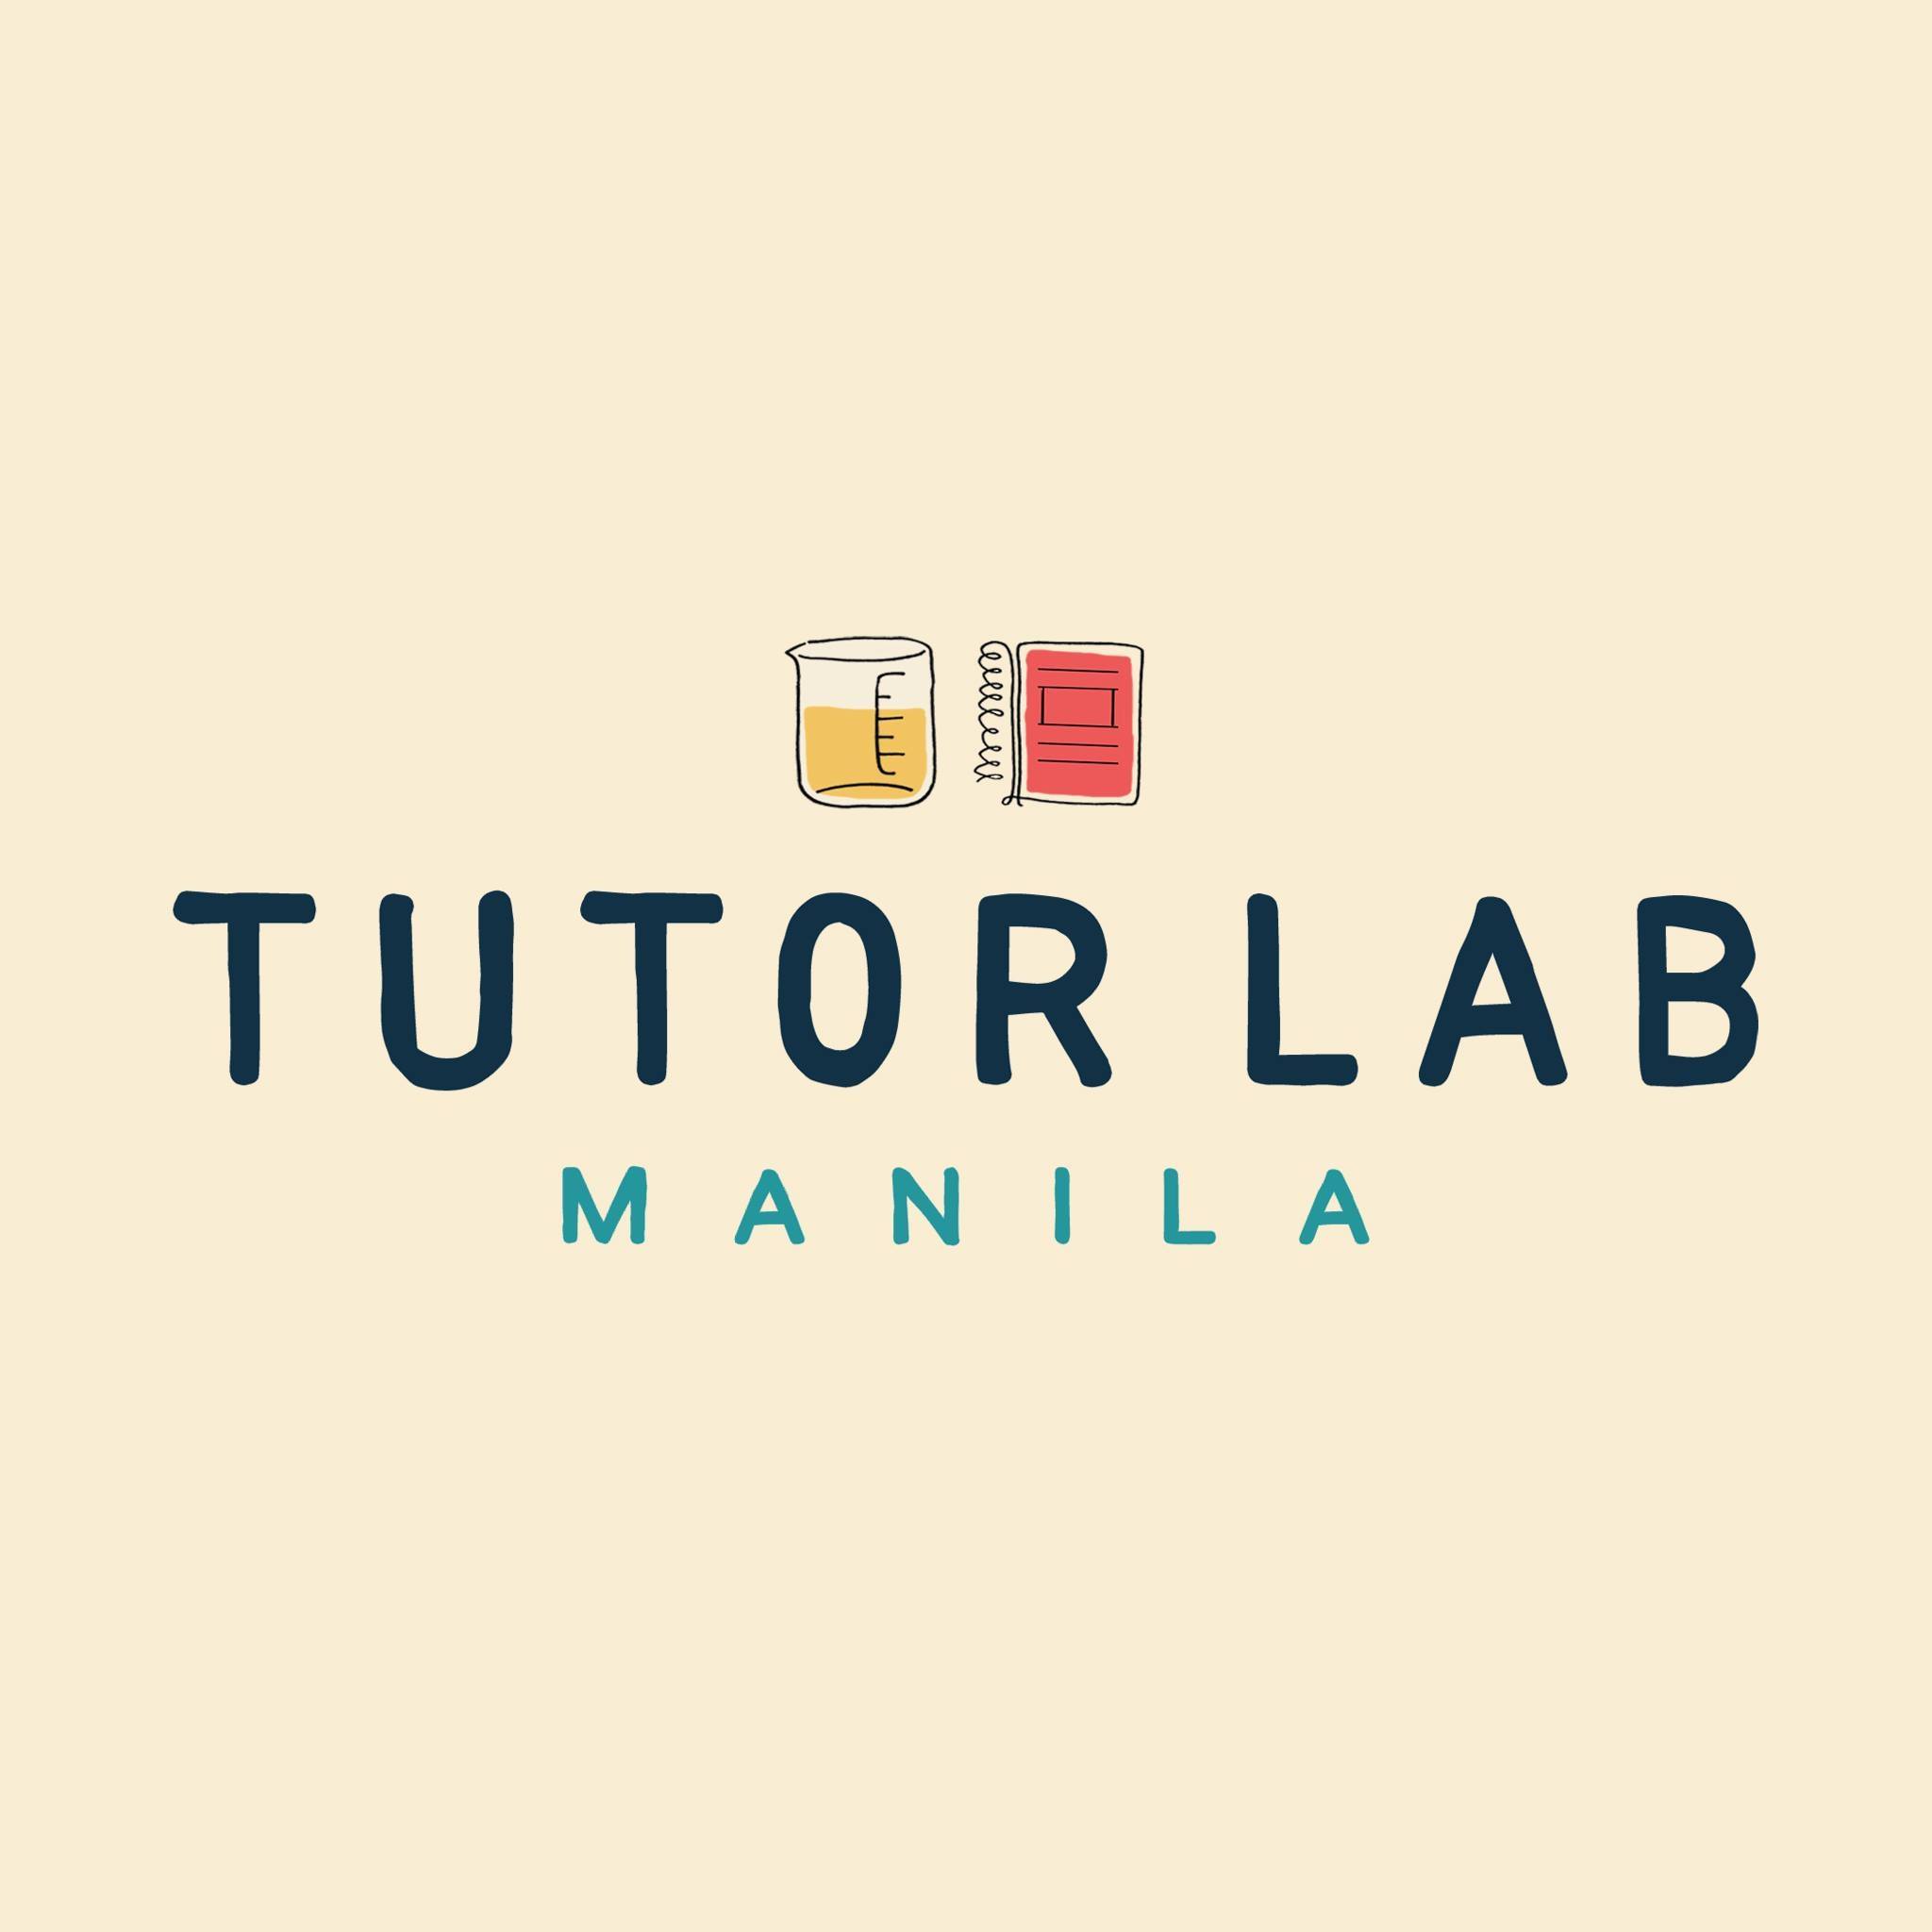 How to Start an Online Tutorial Business in the Philippines